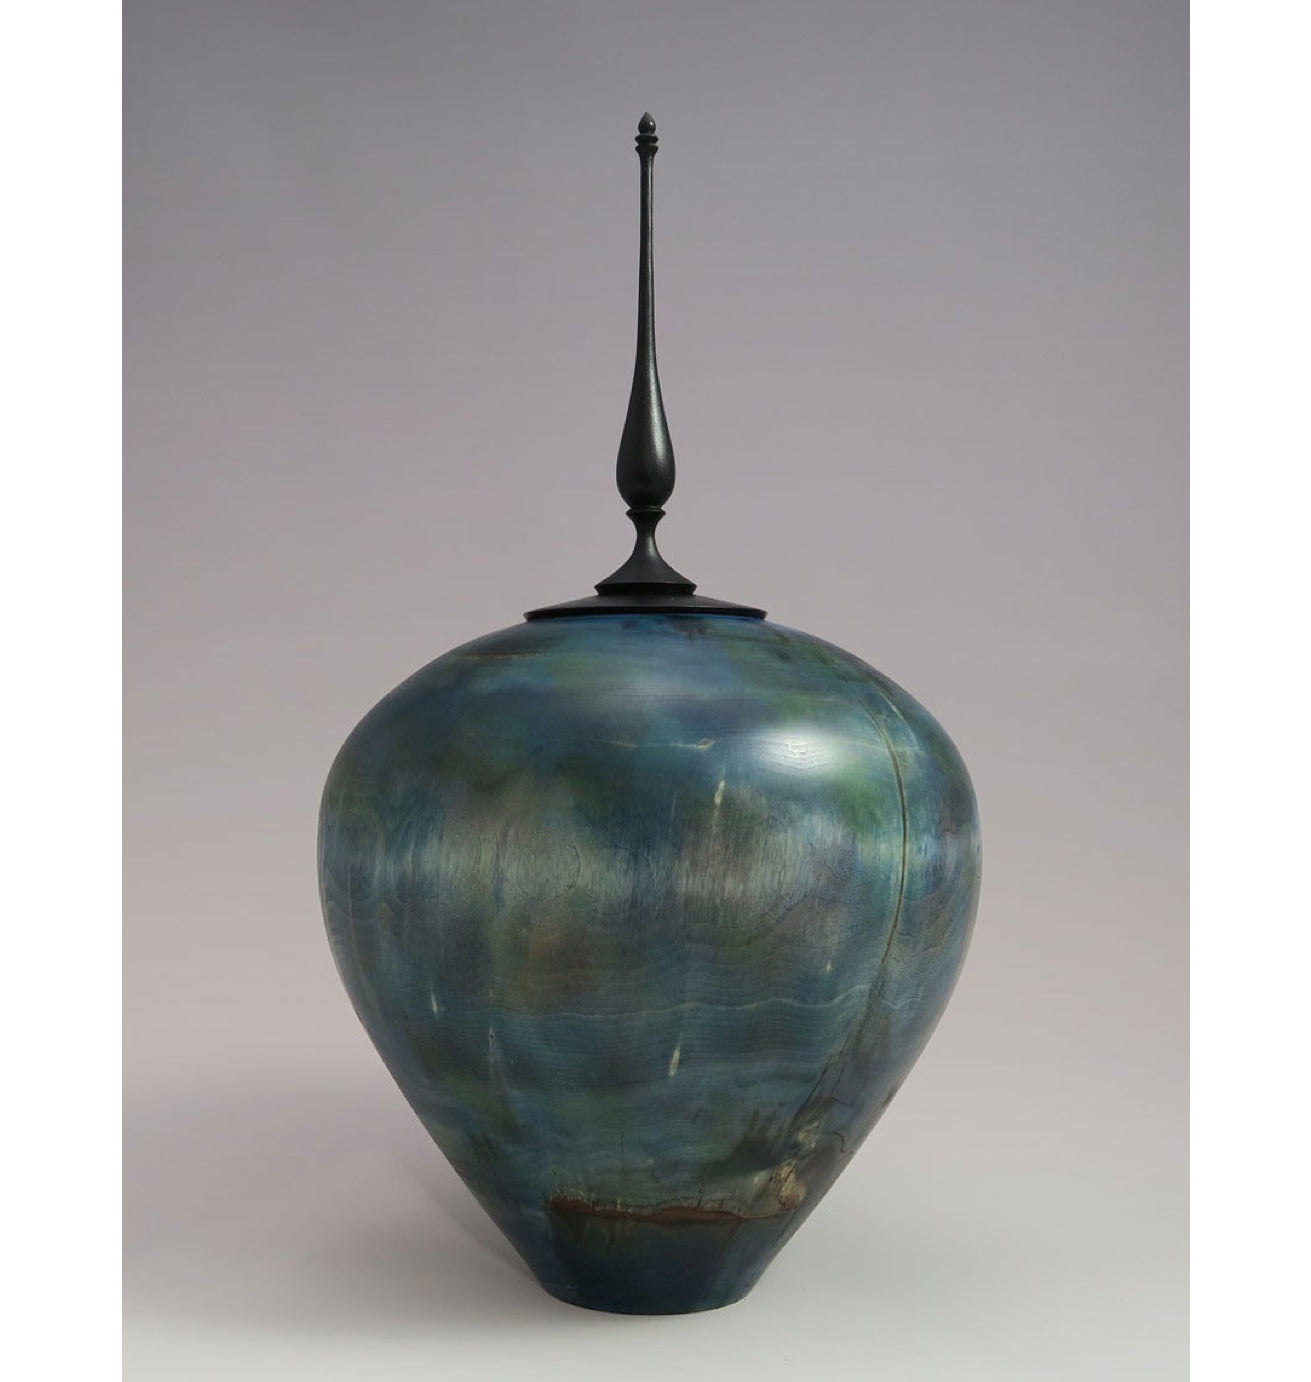 Poplar Hollow Form Dyed with Finial - Frank Didomizio-Woodworking-Eclipse Art Gallery